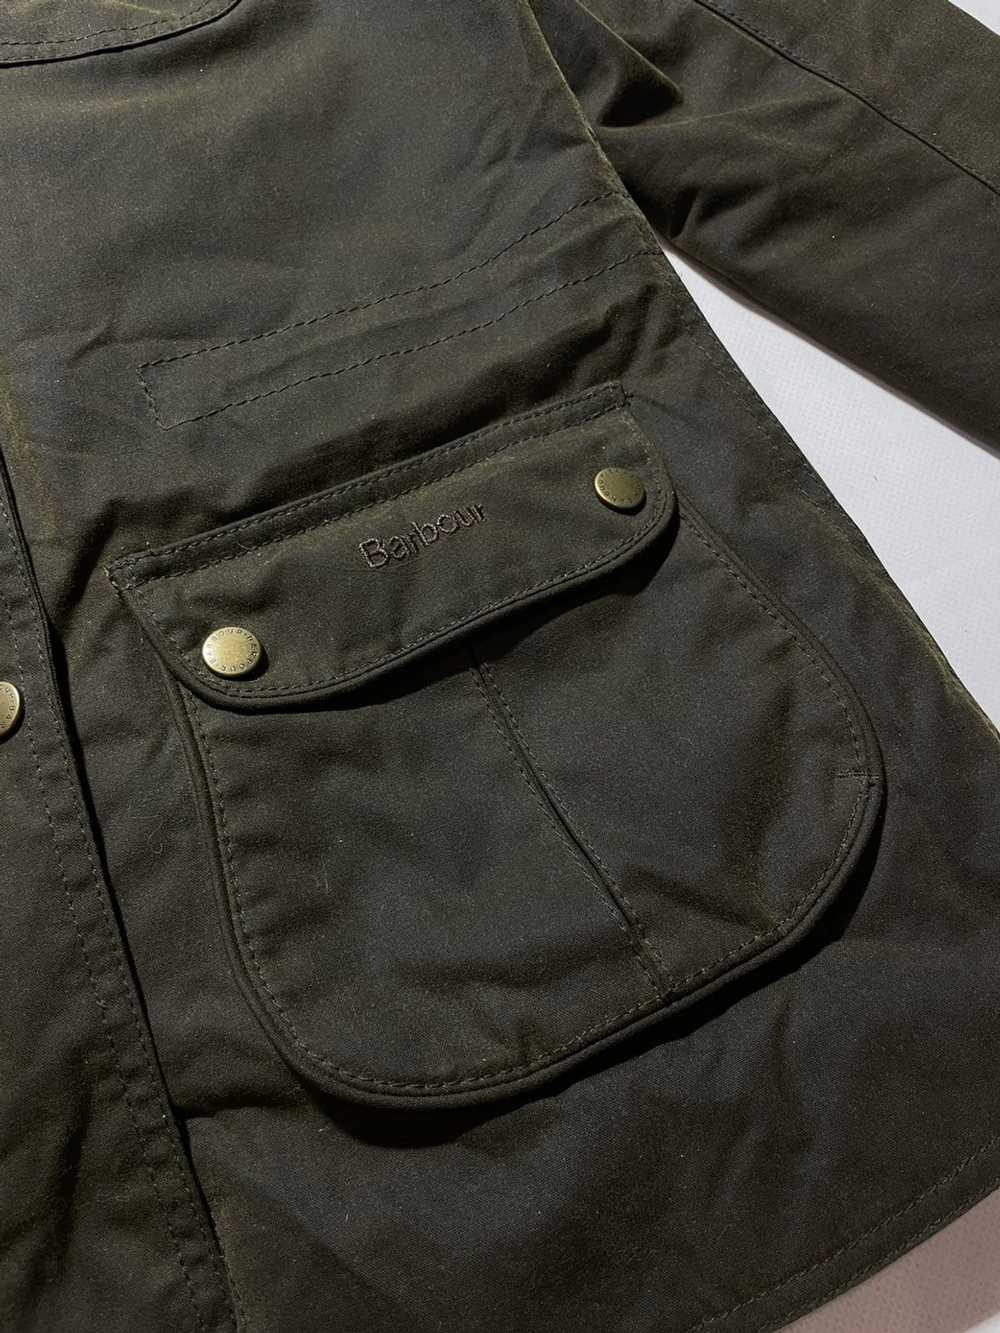 Barbour × Waxed Barbour Ladies Waxed Cotton Jacket - image 5